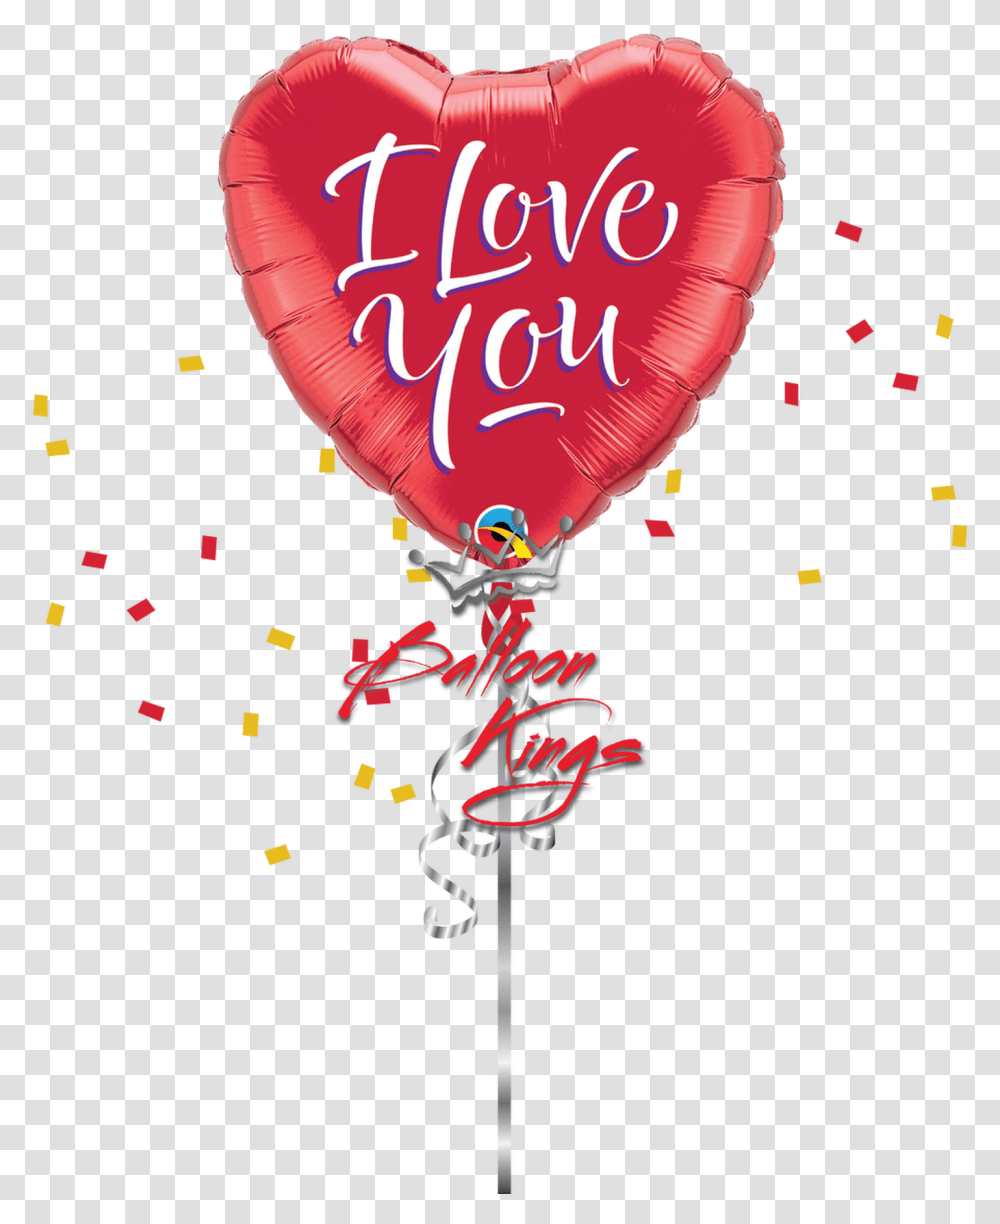 I Love You Heart Love You Balloon Transparent Png